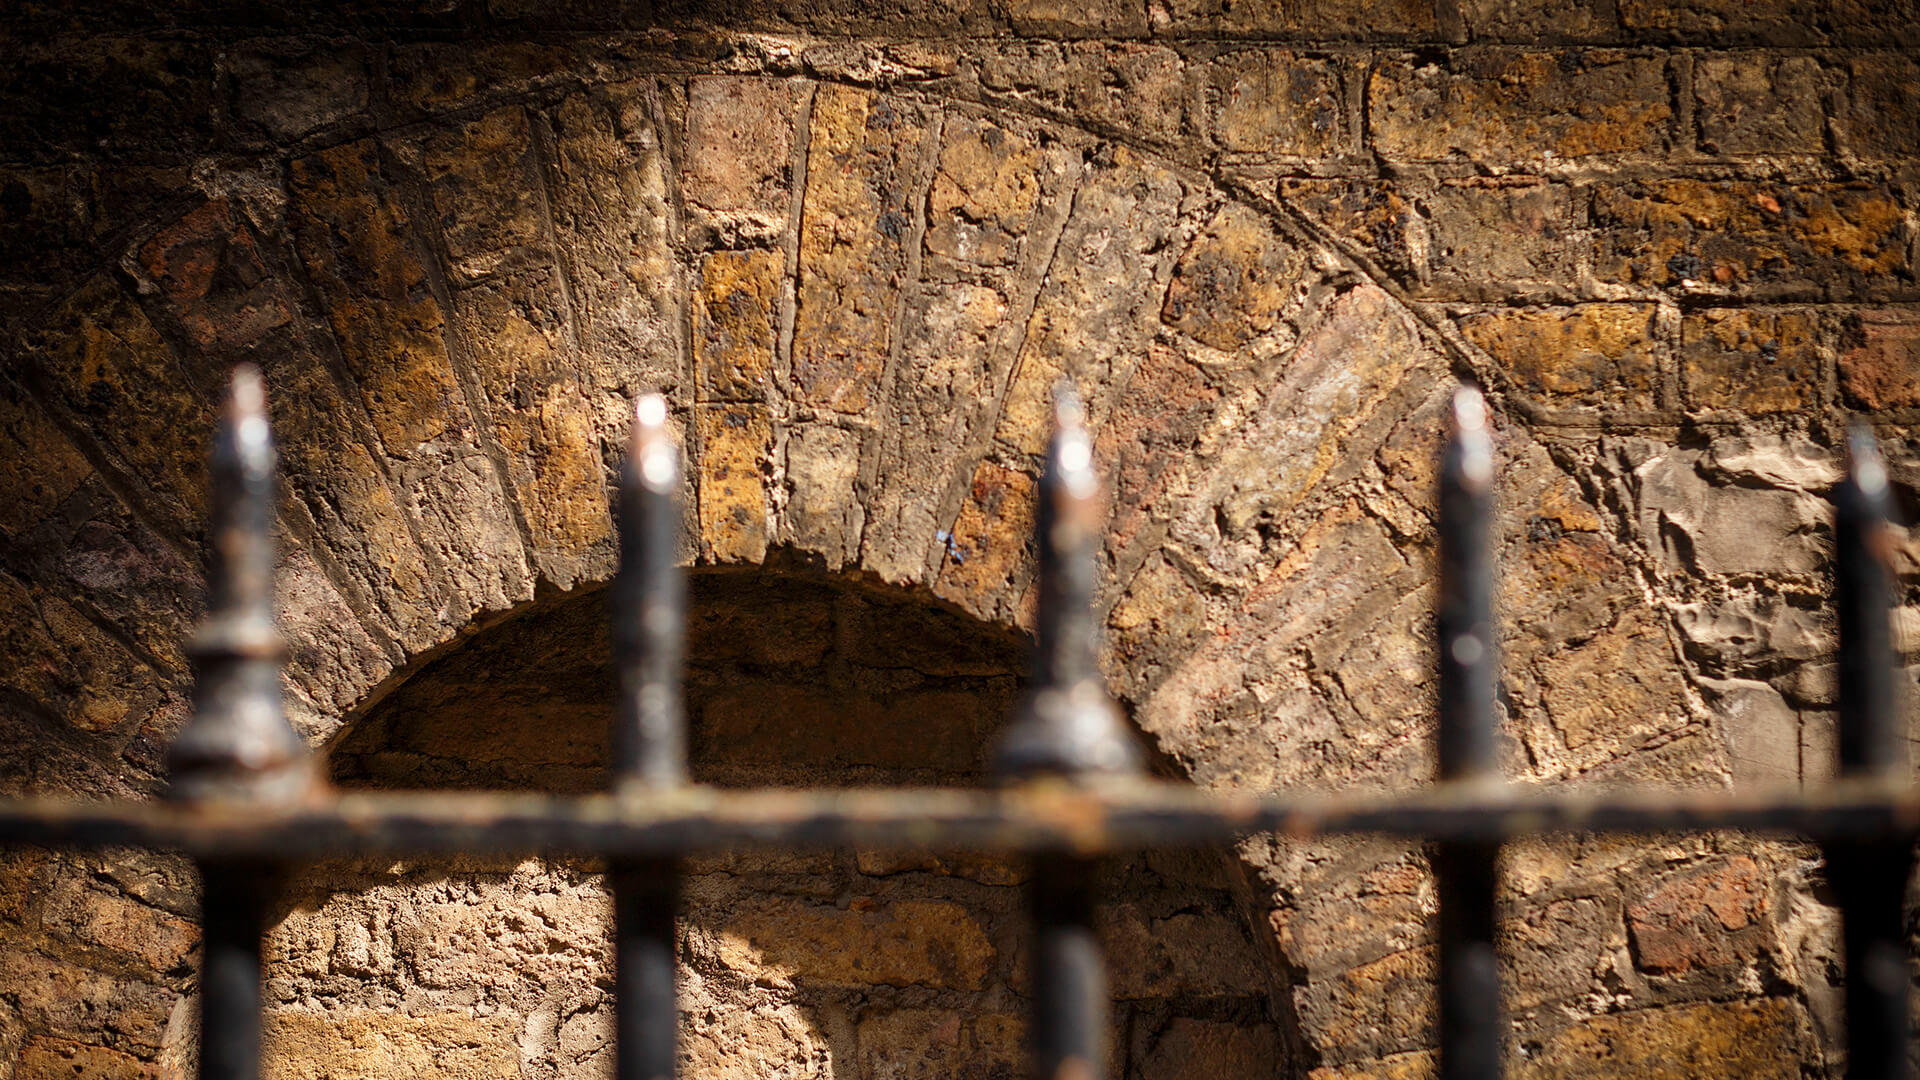 A close-up of an old brickwork wall in the Liberties with iron railings in the foreground